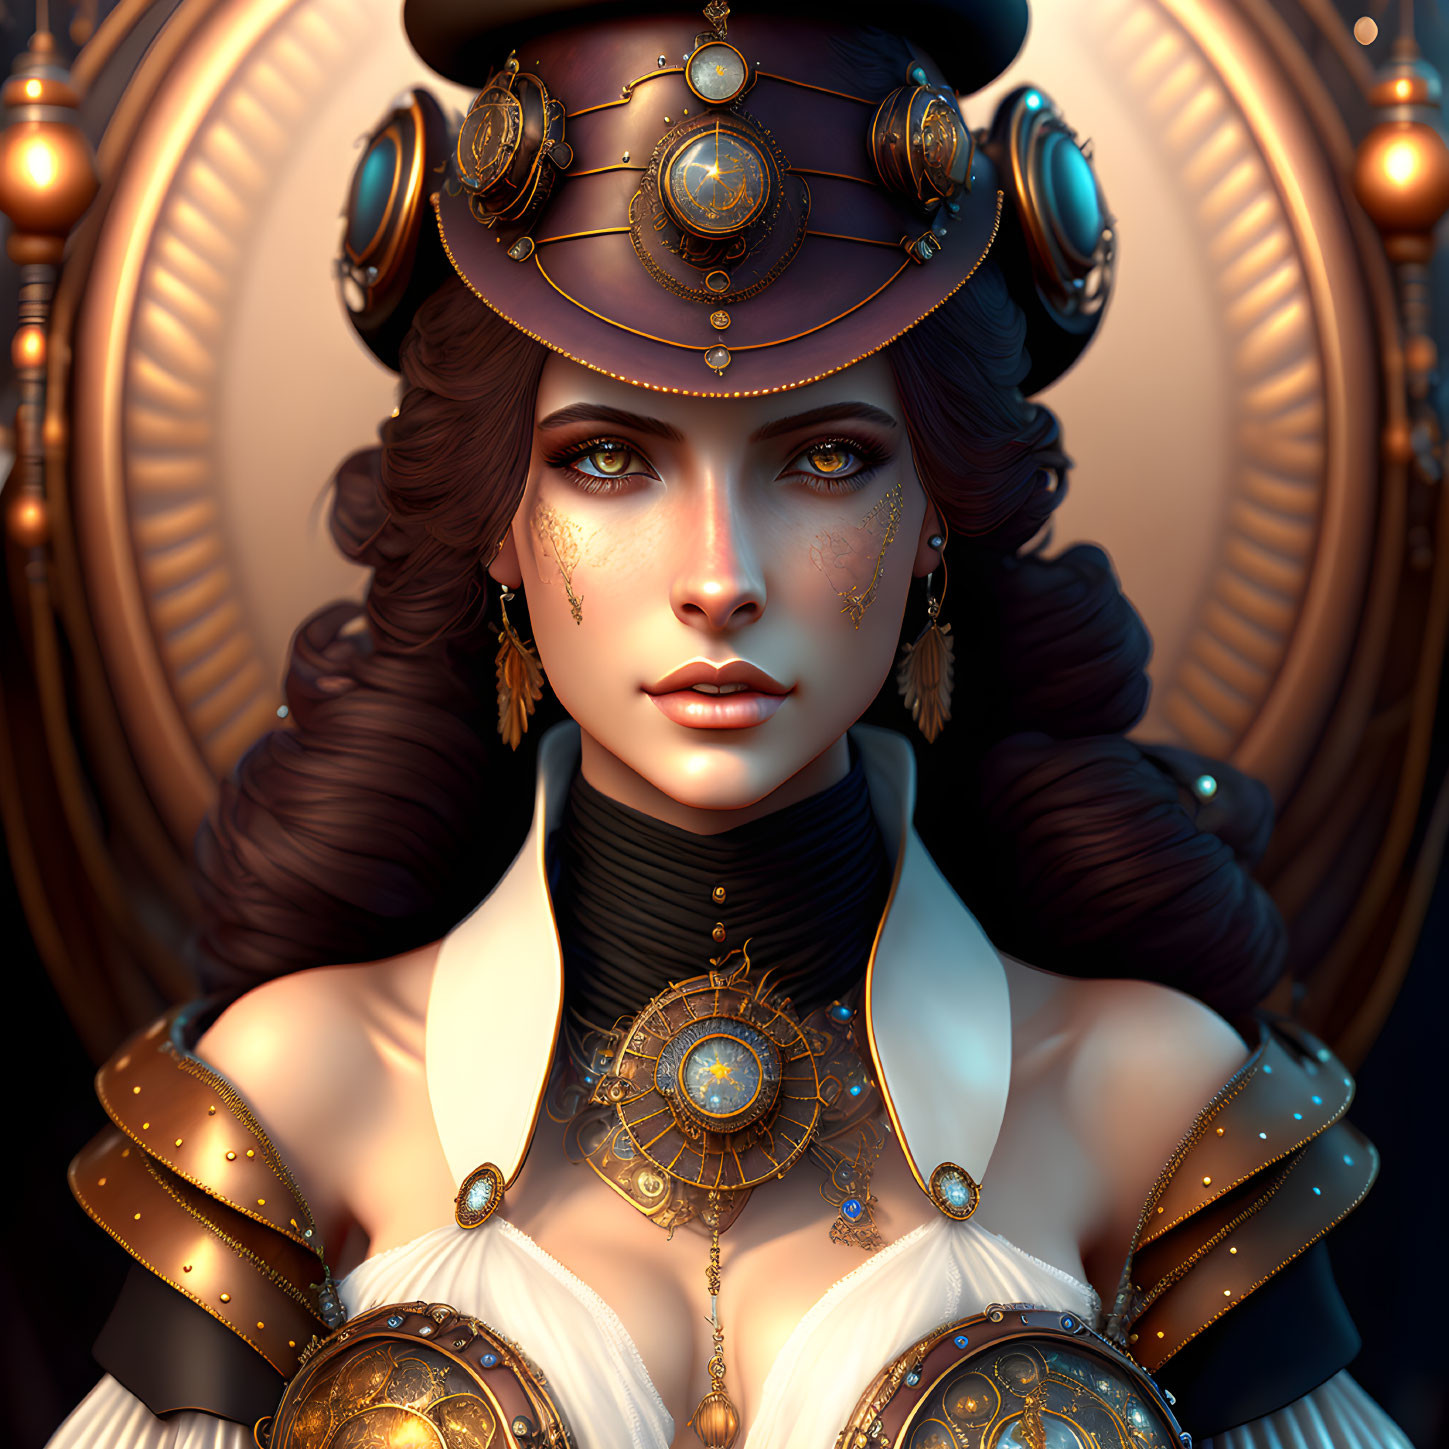 Steampunk-inspired woman digital artwork with intricate attire and gear-shaped backdrop.